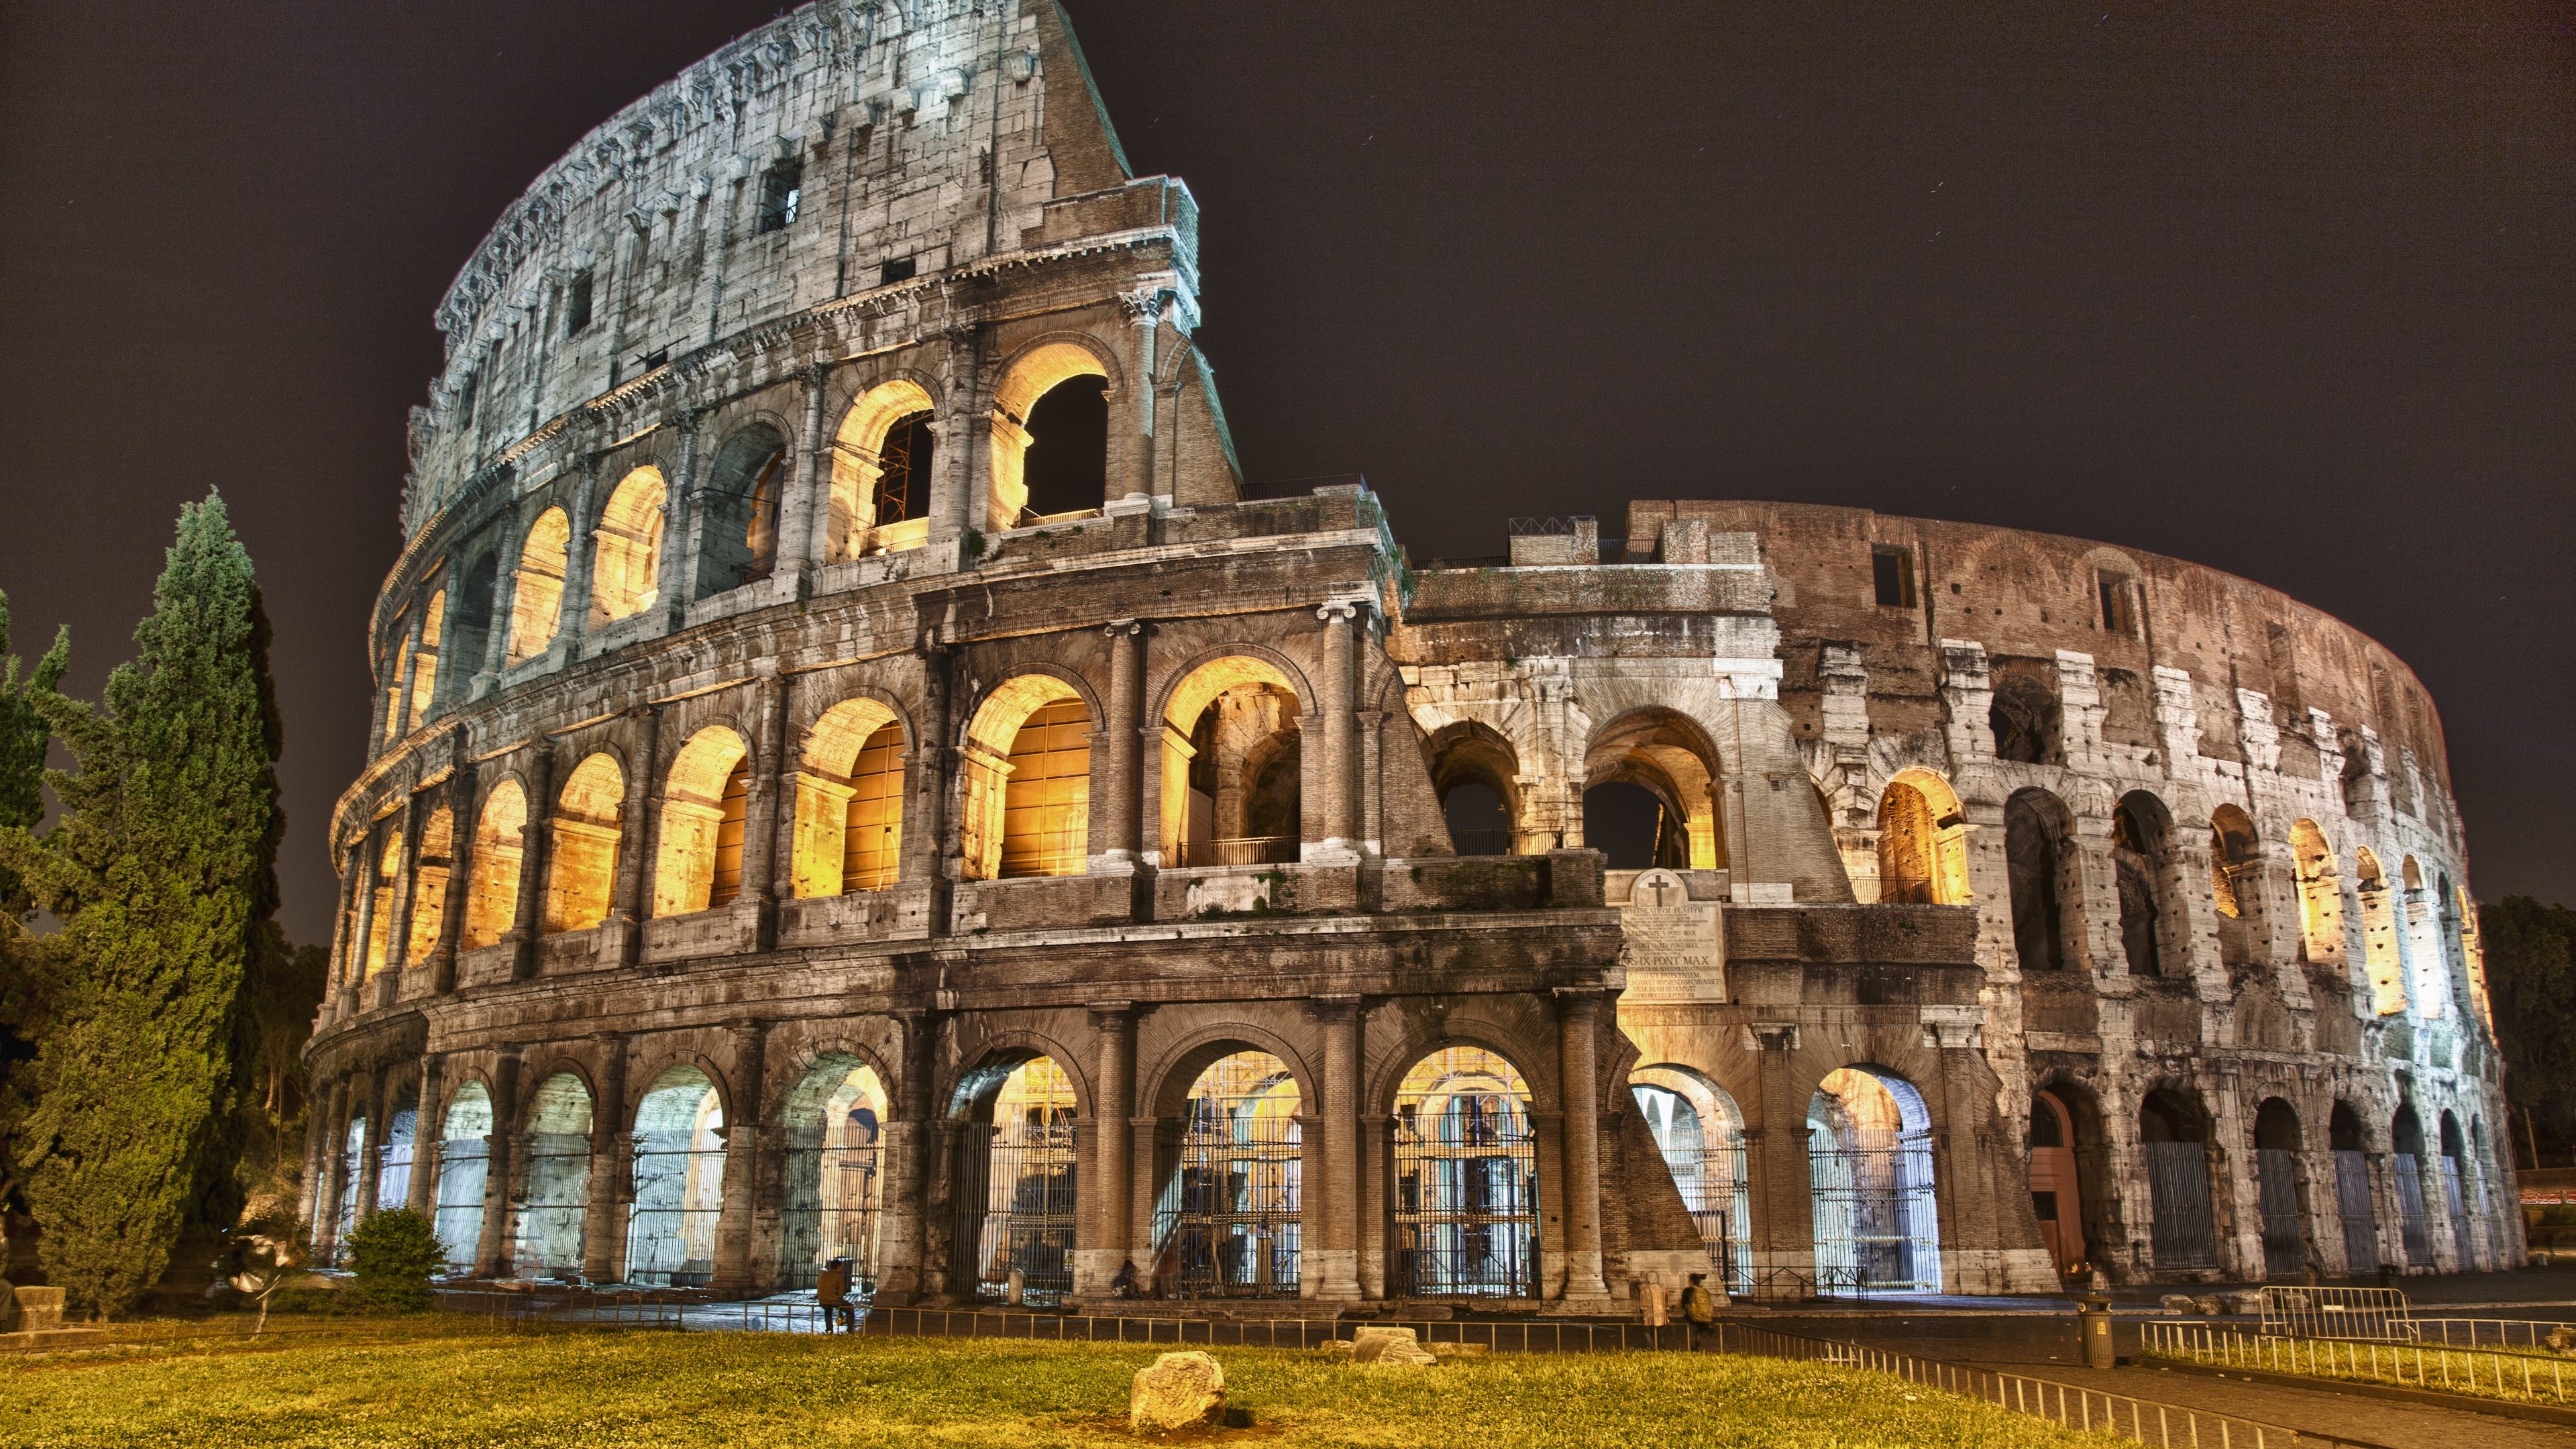 General 3840x2160 Colosseum architecture HDR Rome ruins Italy history landmark World Heritage Site